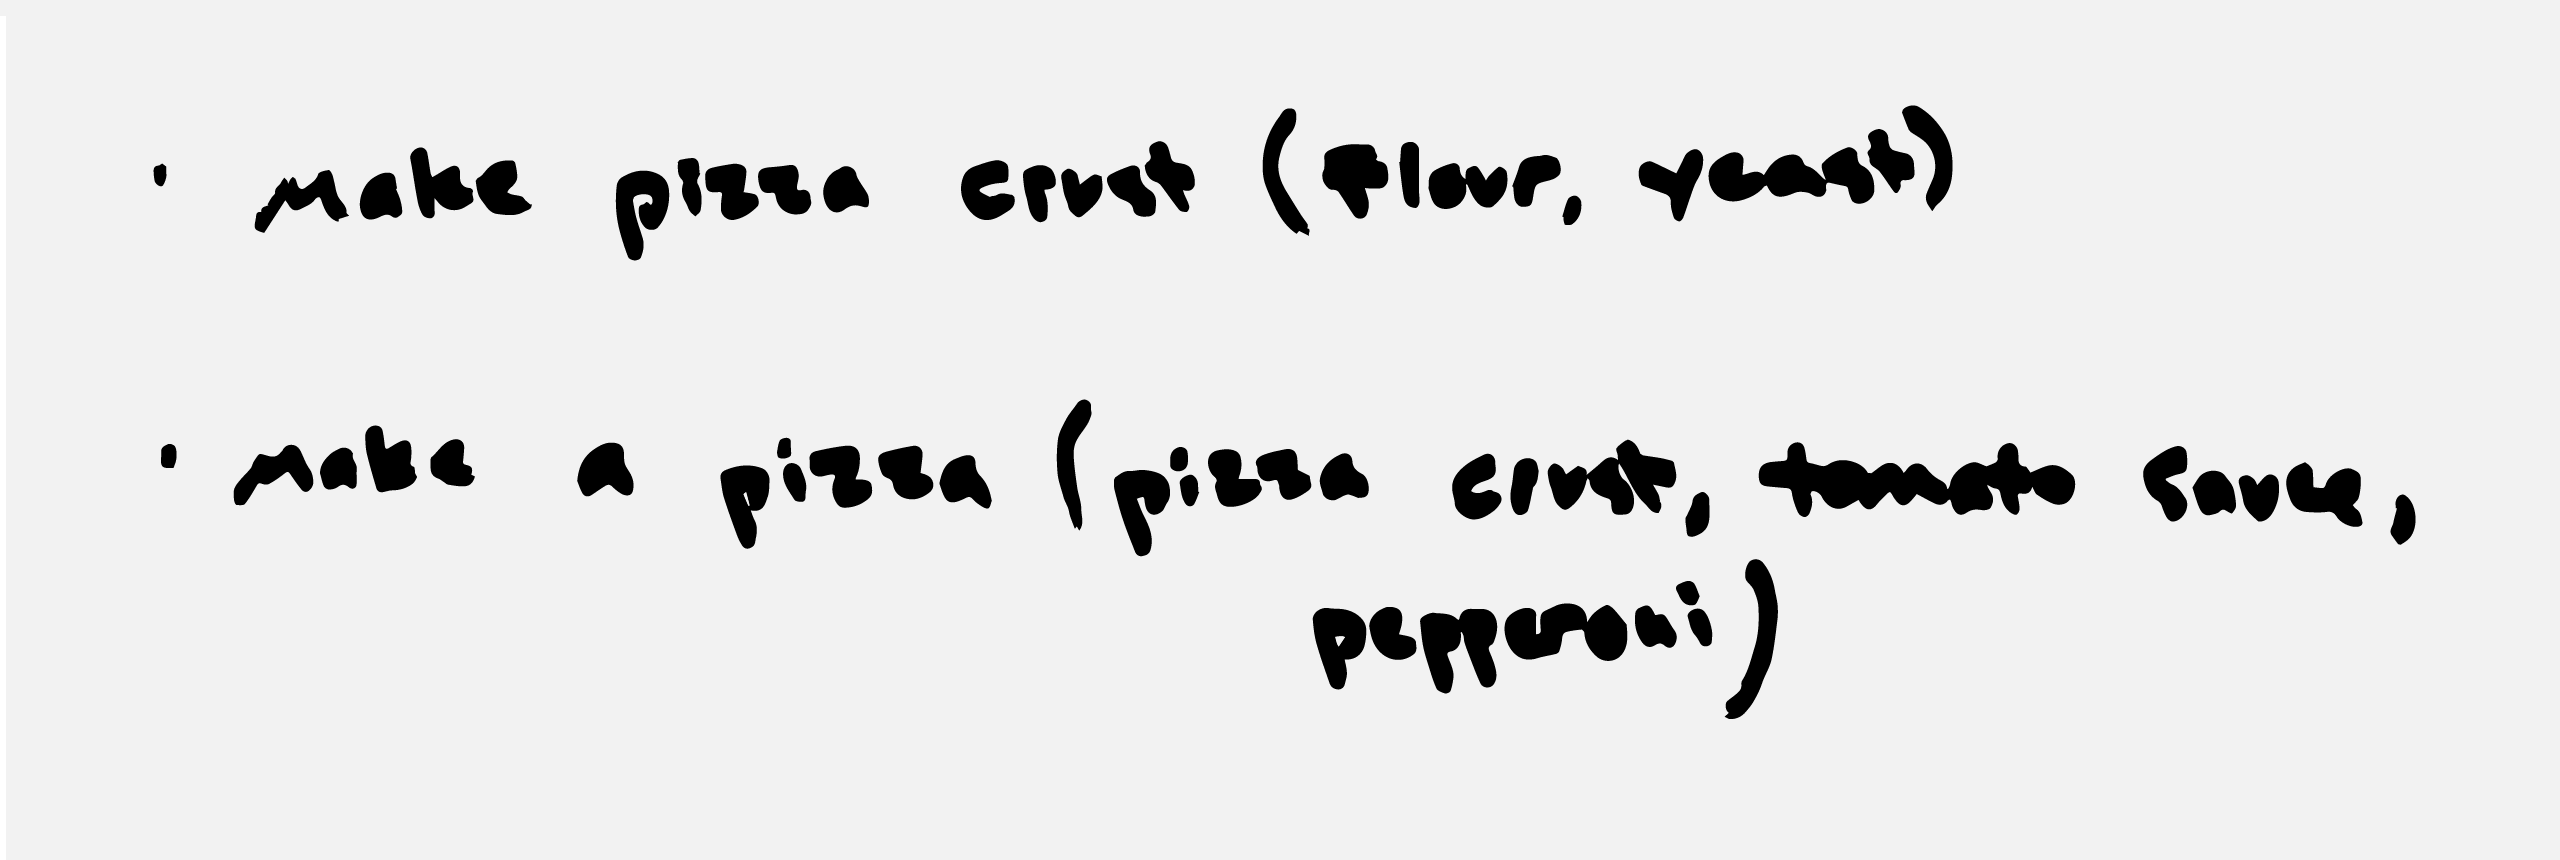 A hand-drawn list of example functions in a baking example: making pizza crust (with flour and yeast), and making a pizza (with a pizza crust, tomato sauce, and pepperoni).